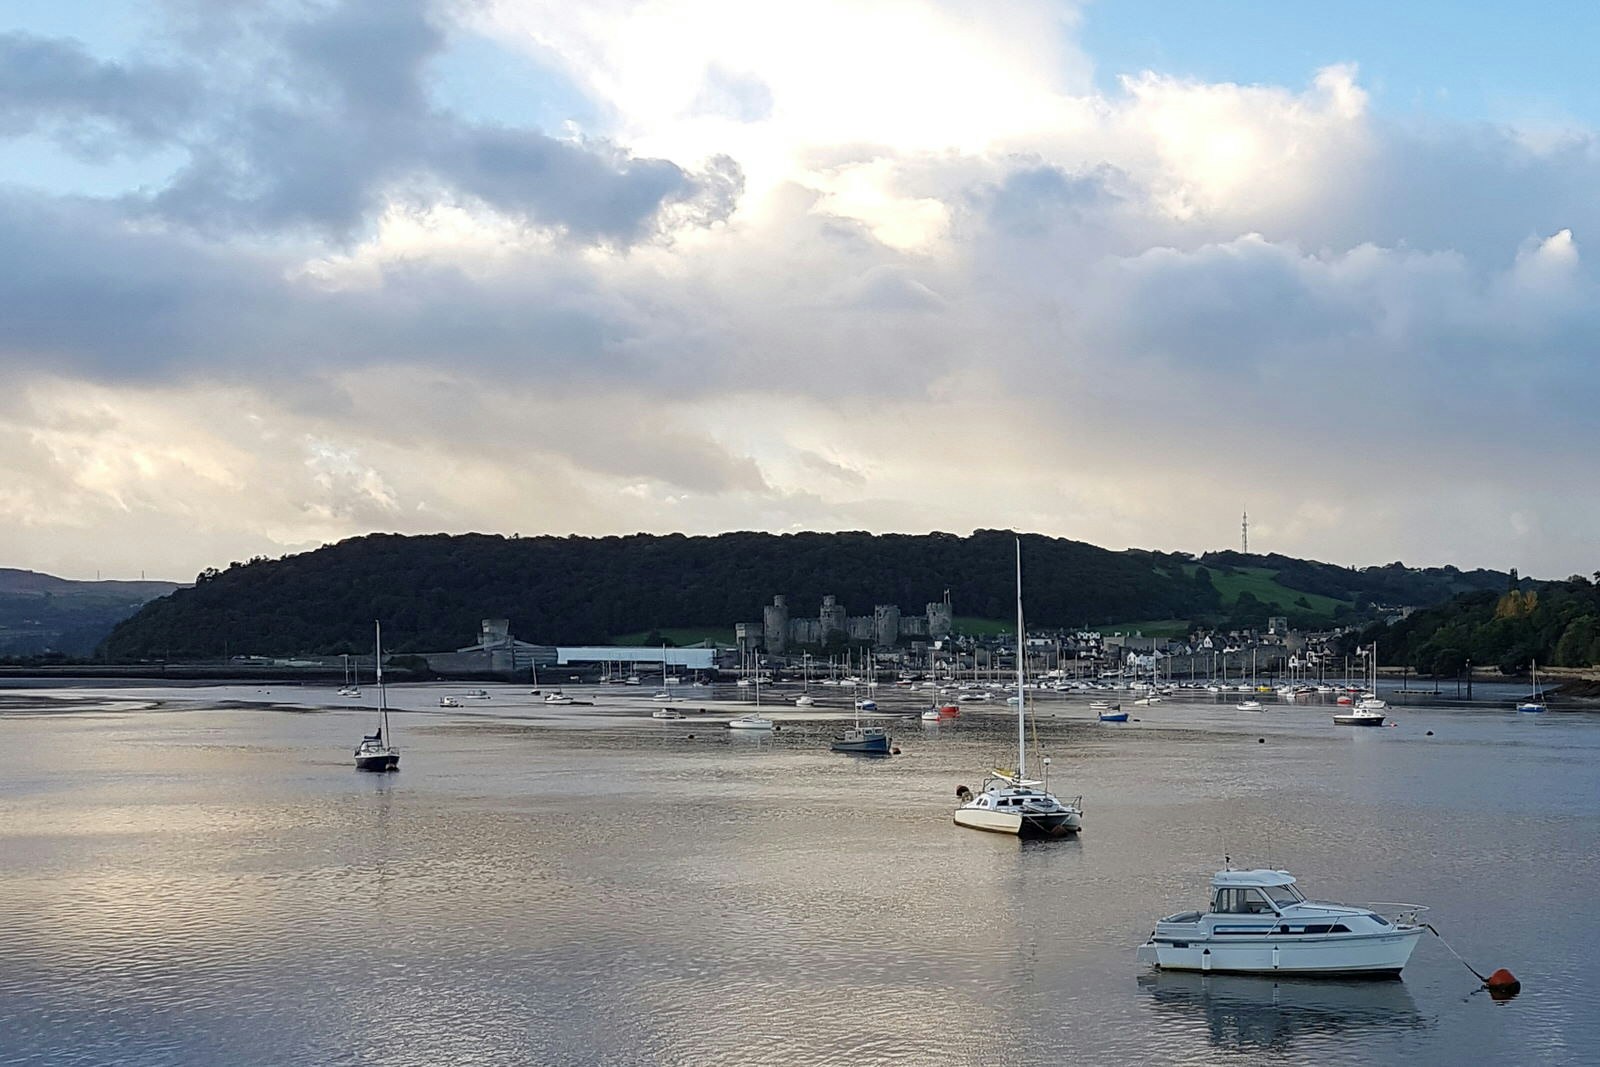 Conwy, with its distinctive castle, seen from the Quay hotel in Deganwy © James Smart / Lonely Planet